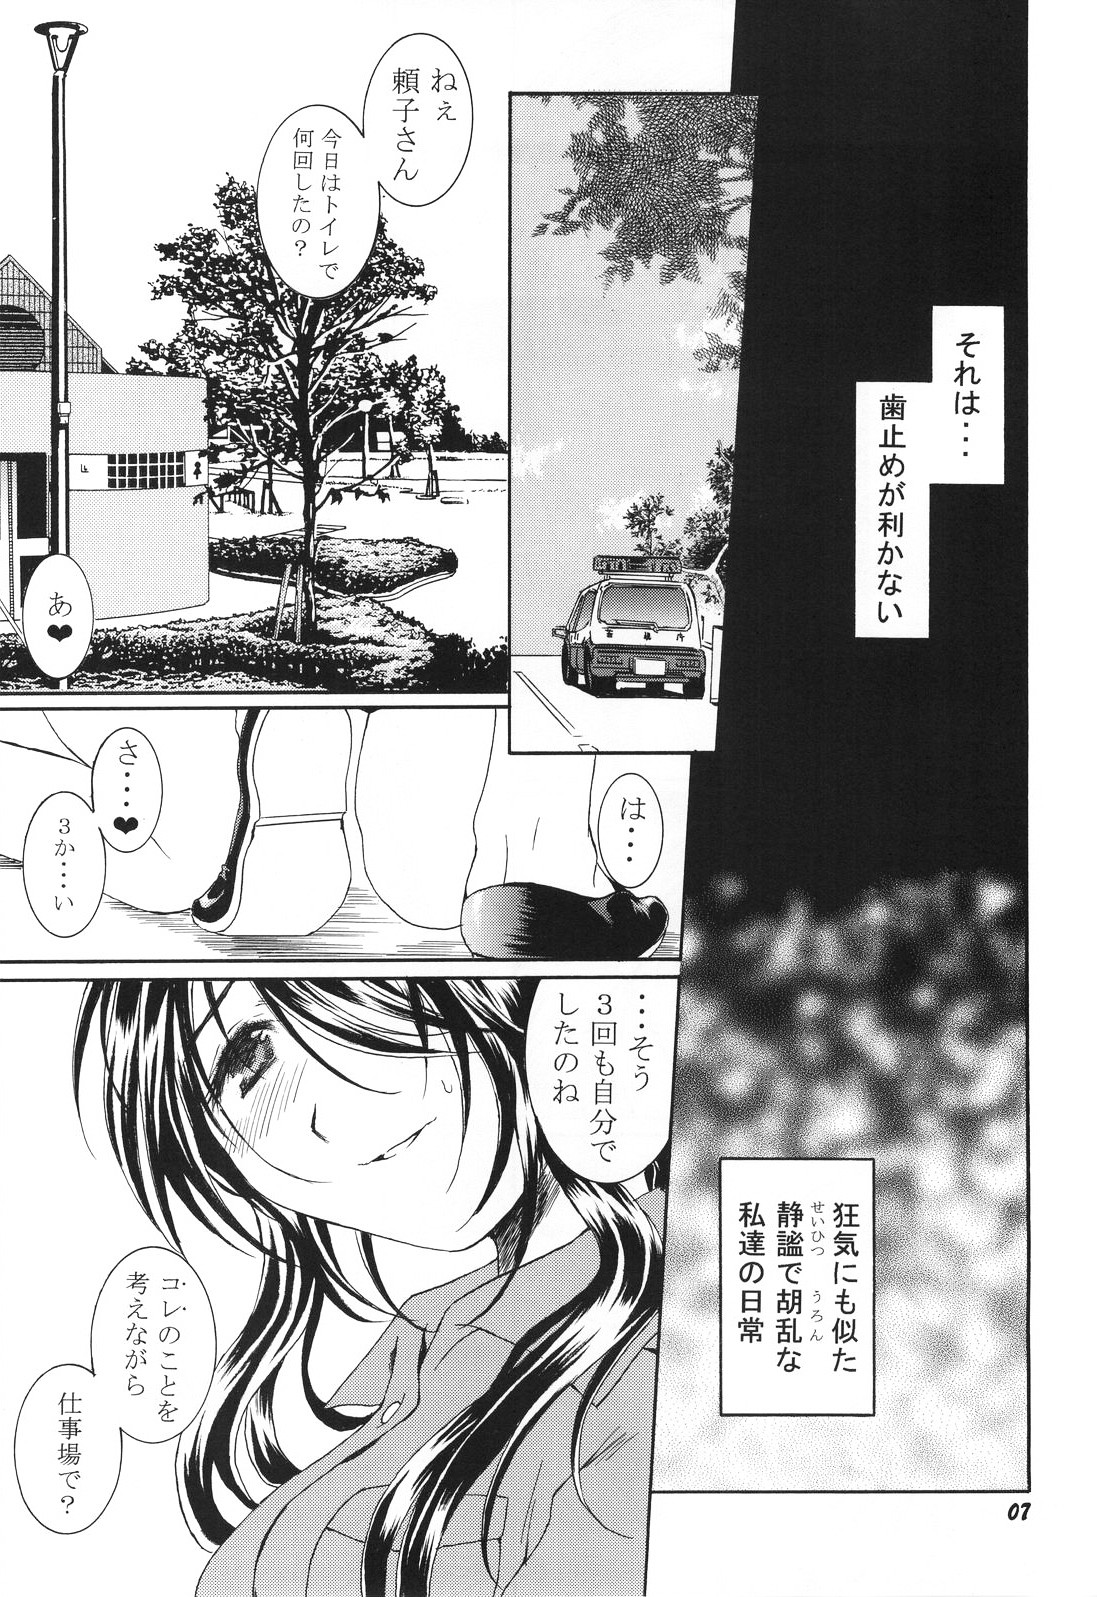 [Mechanical Code (Takahashi Kobato)] method to the madness 3 (You're Under Arrest!) page 6 full